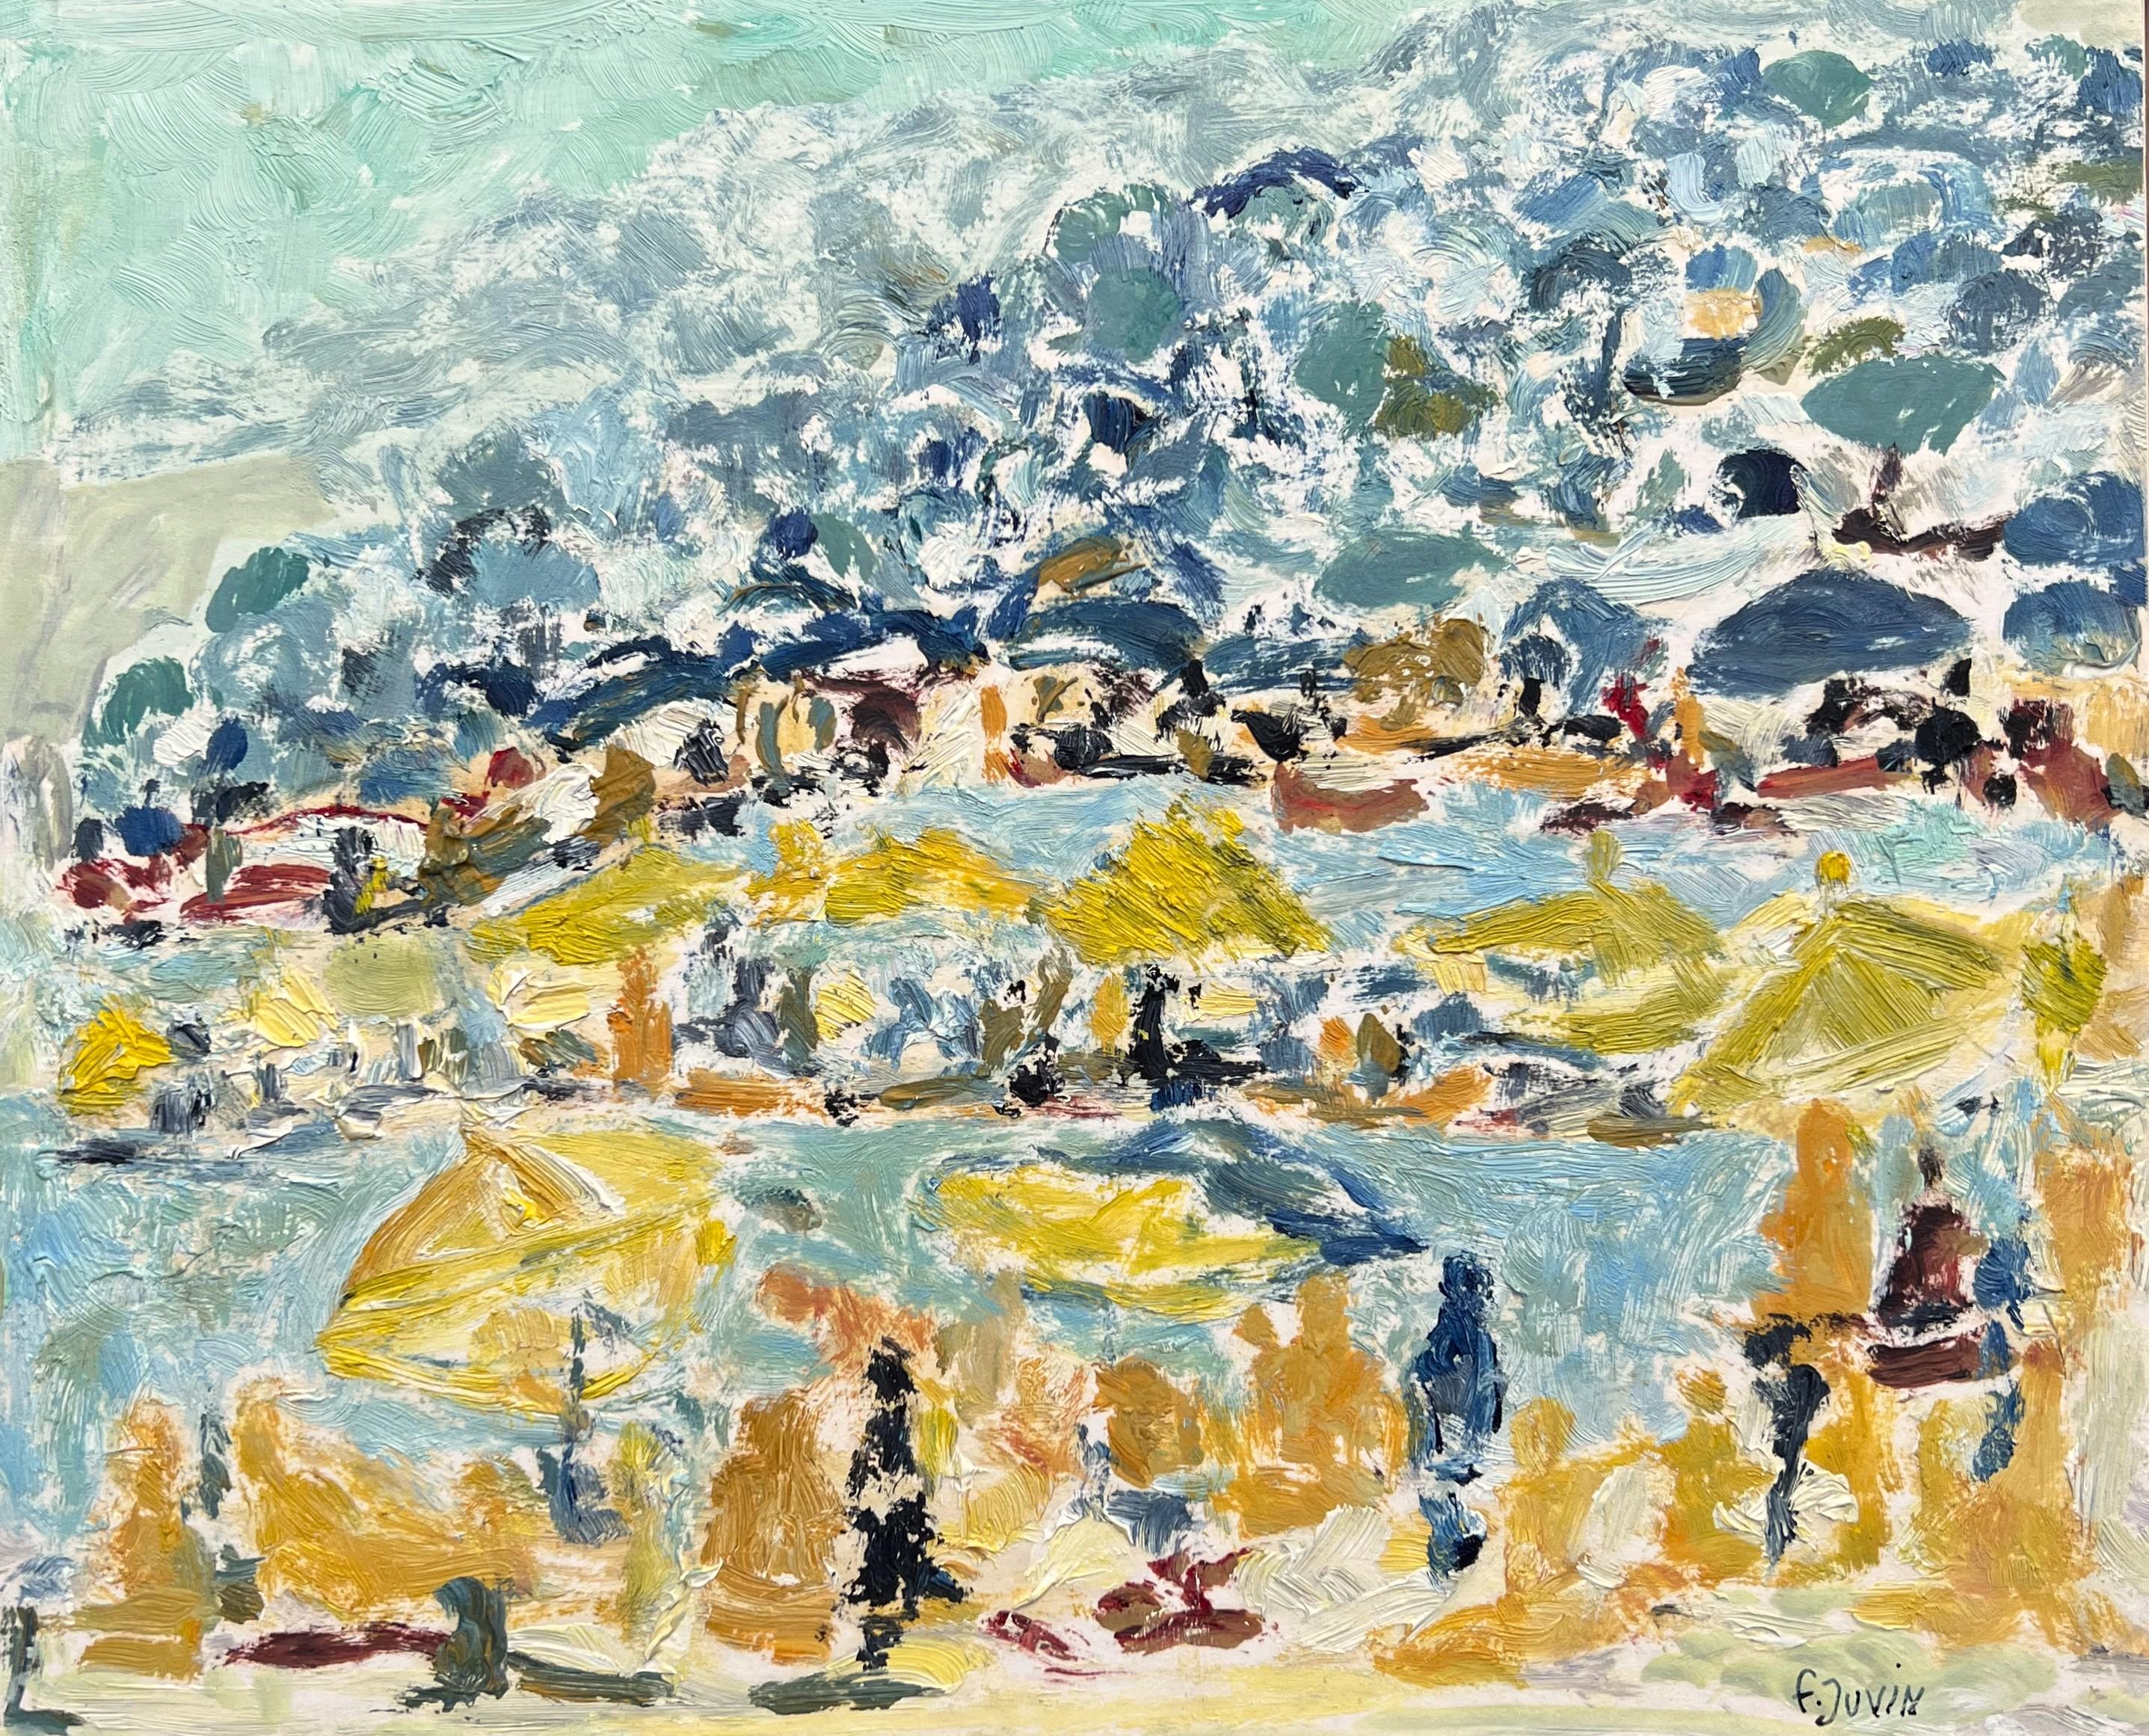 Françoise Juvin - Seaside Landscape in Cannes, France
Reference number FJ55
Framed with a natural oak floated frame.
24,5 x 29 cm frame included (19 x 23 cm without frame)
This work is painted with oil on a paper that is mounted on a board and